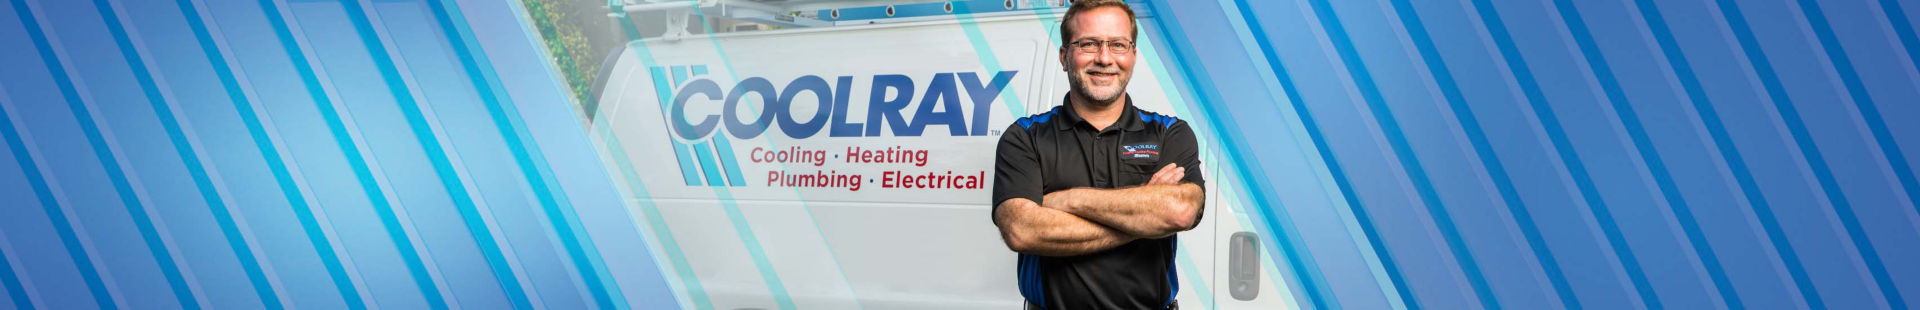 Coolray AC technician and service vehicle